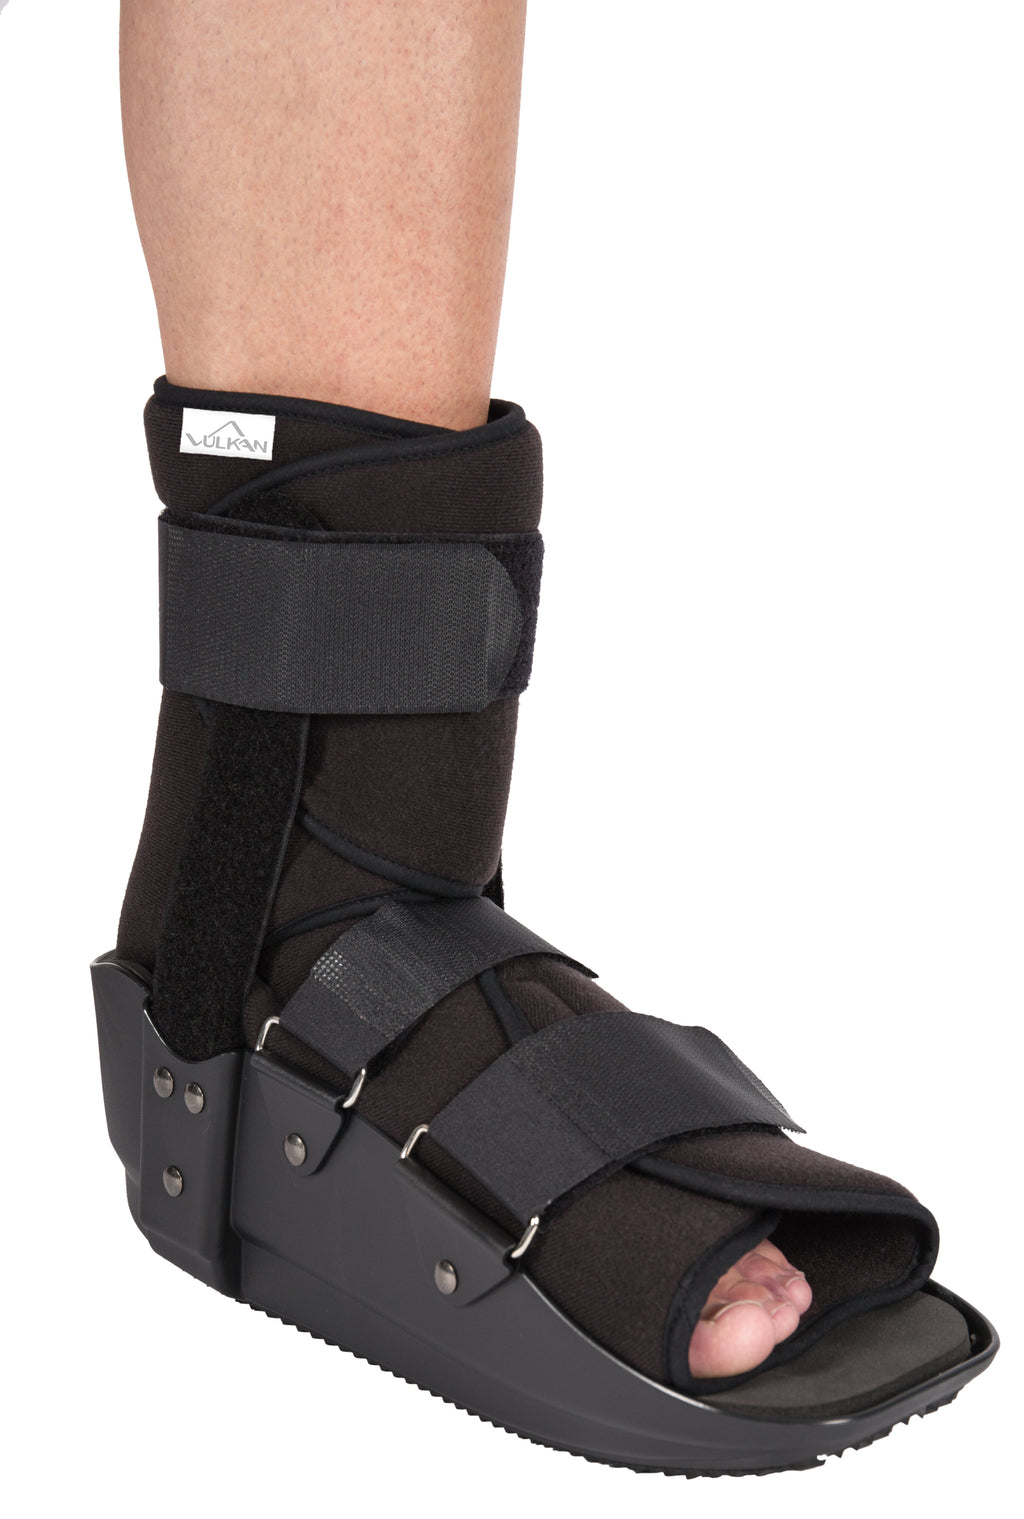 moon boot, short walker, fixed ankle walker for foot and ankle injuries